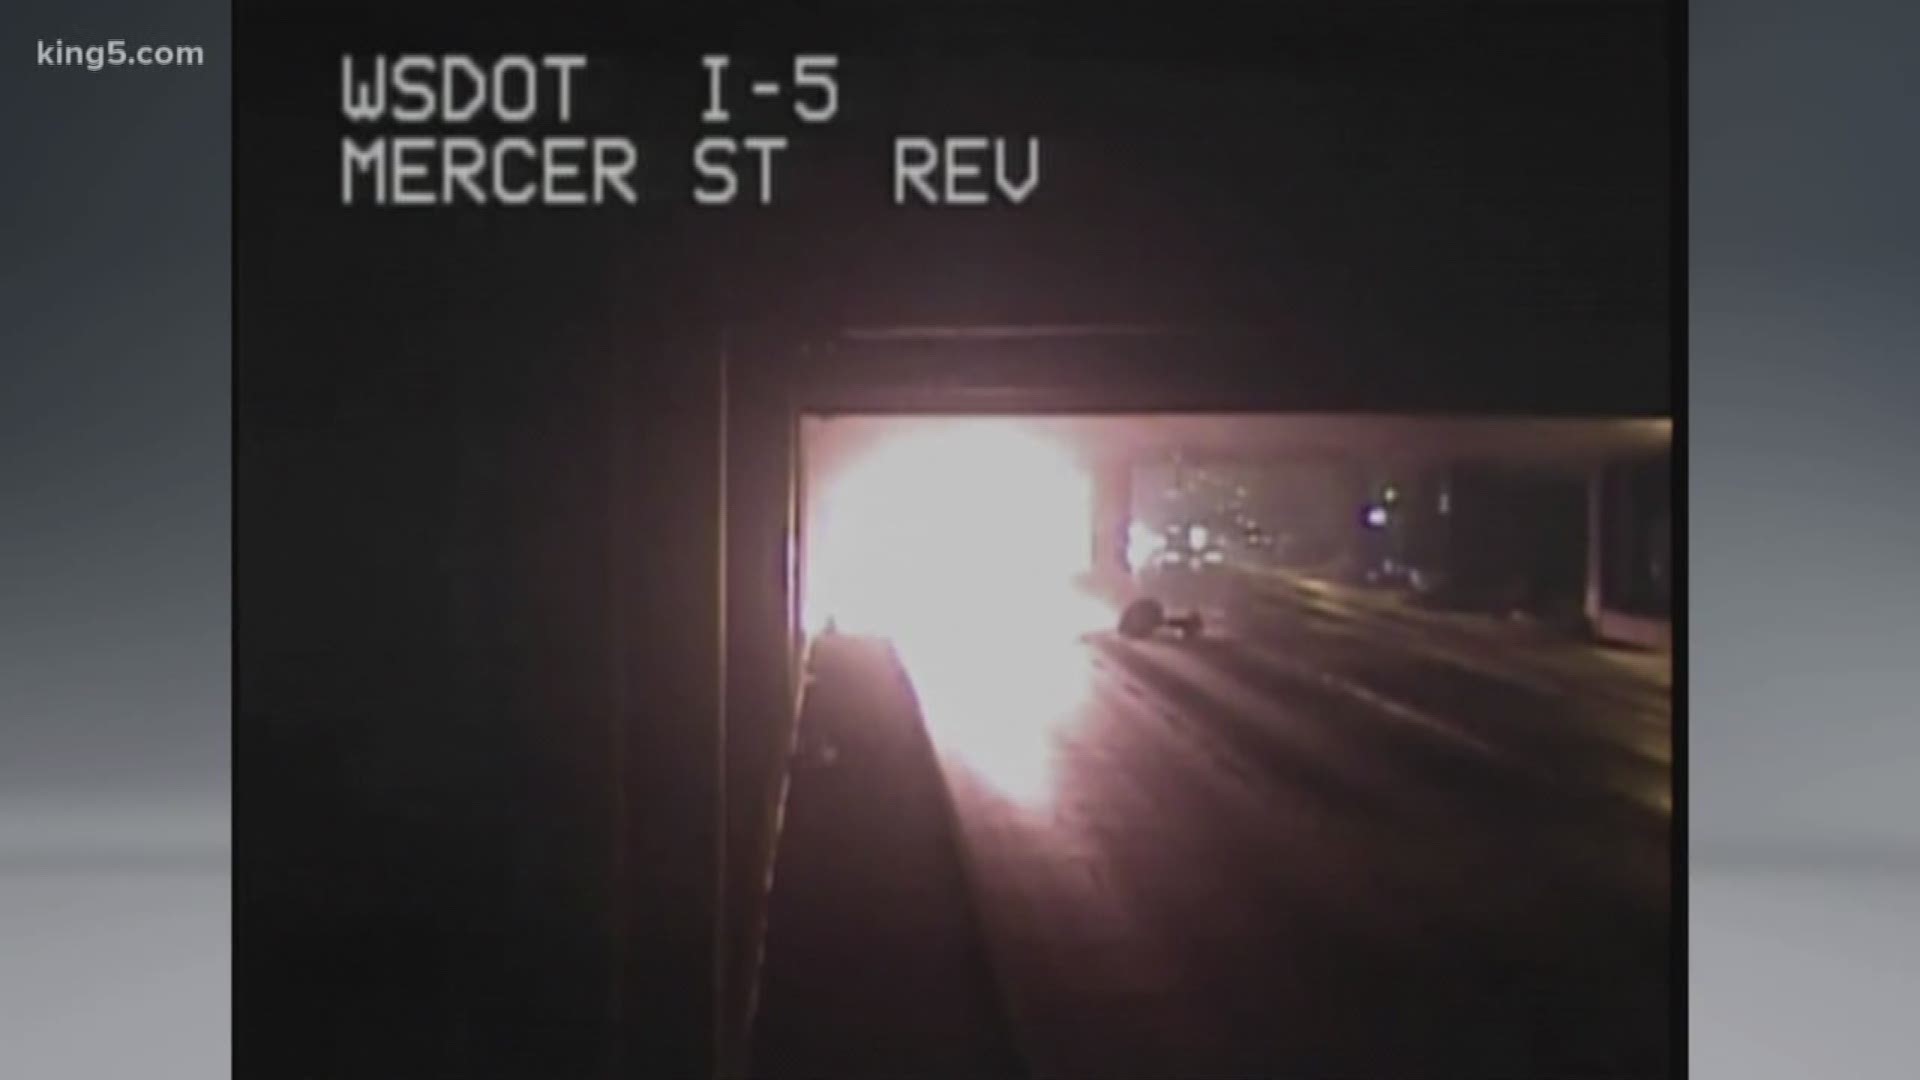 A truck fire has all southbound express lanes of I-5 blocked near Mercer Street.